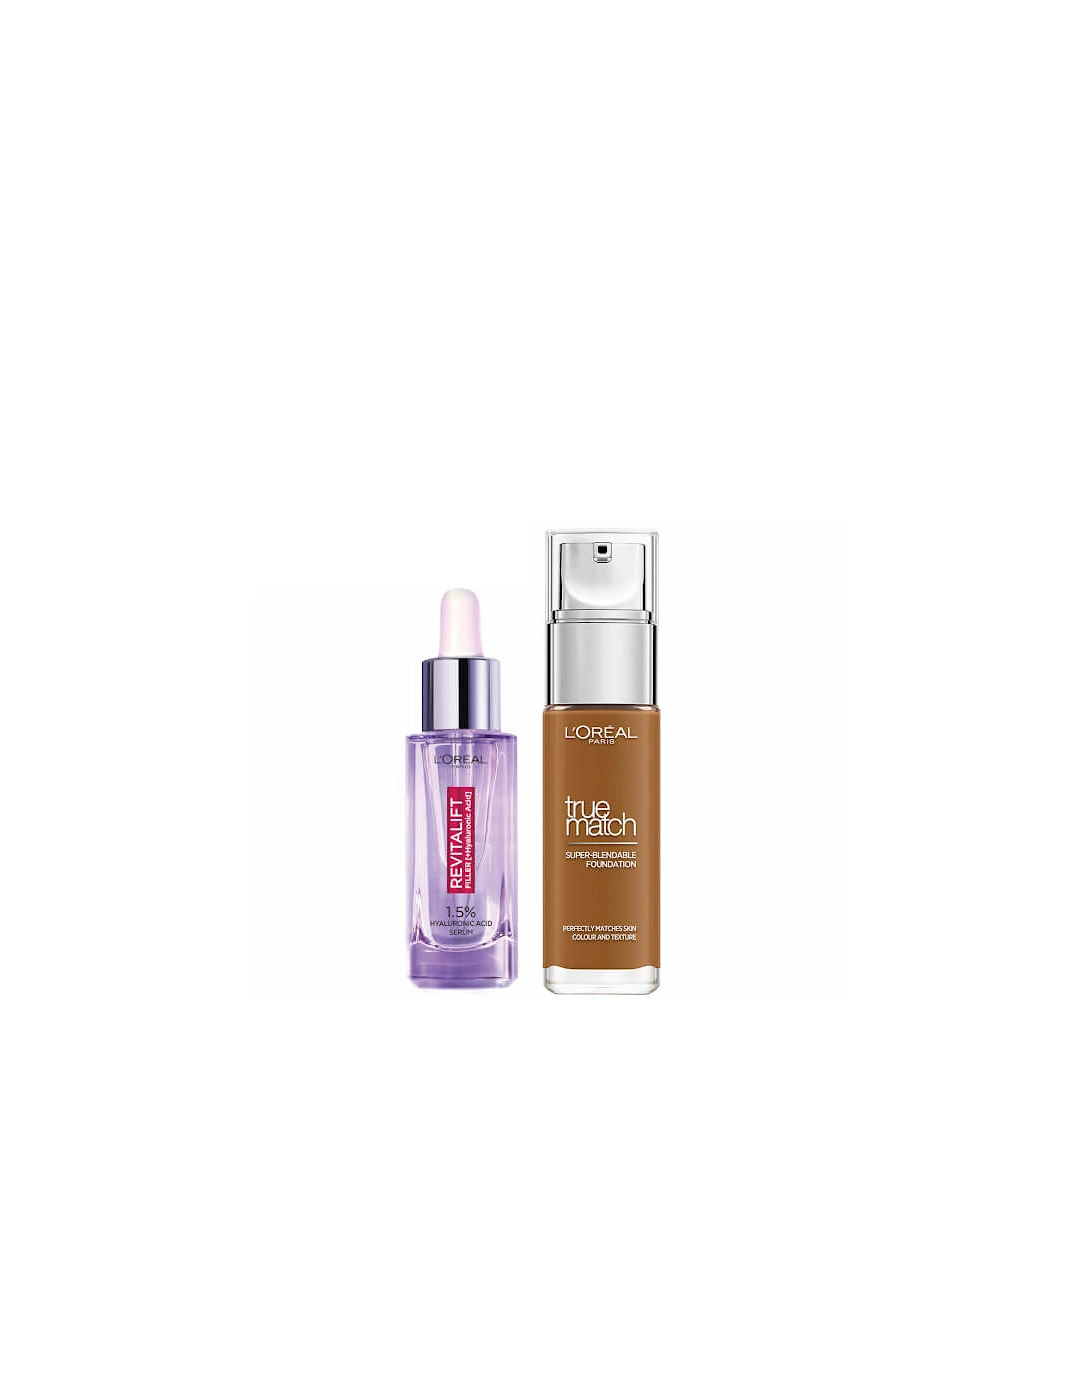 L’Oreal Paris Hyaluronic Acid Filler Serum and True Match Hyaluronic Acid Foundation Duo - 7.5W Golden Chestnut, 41 of 40